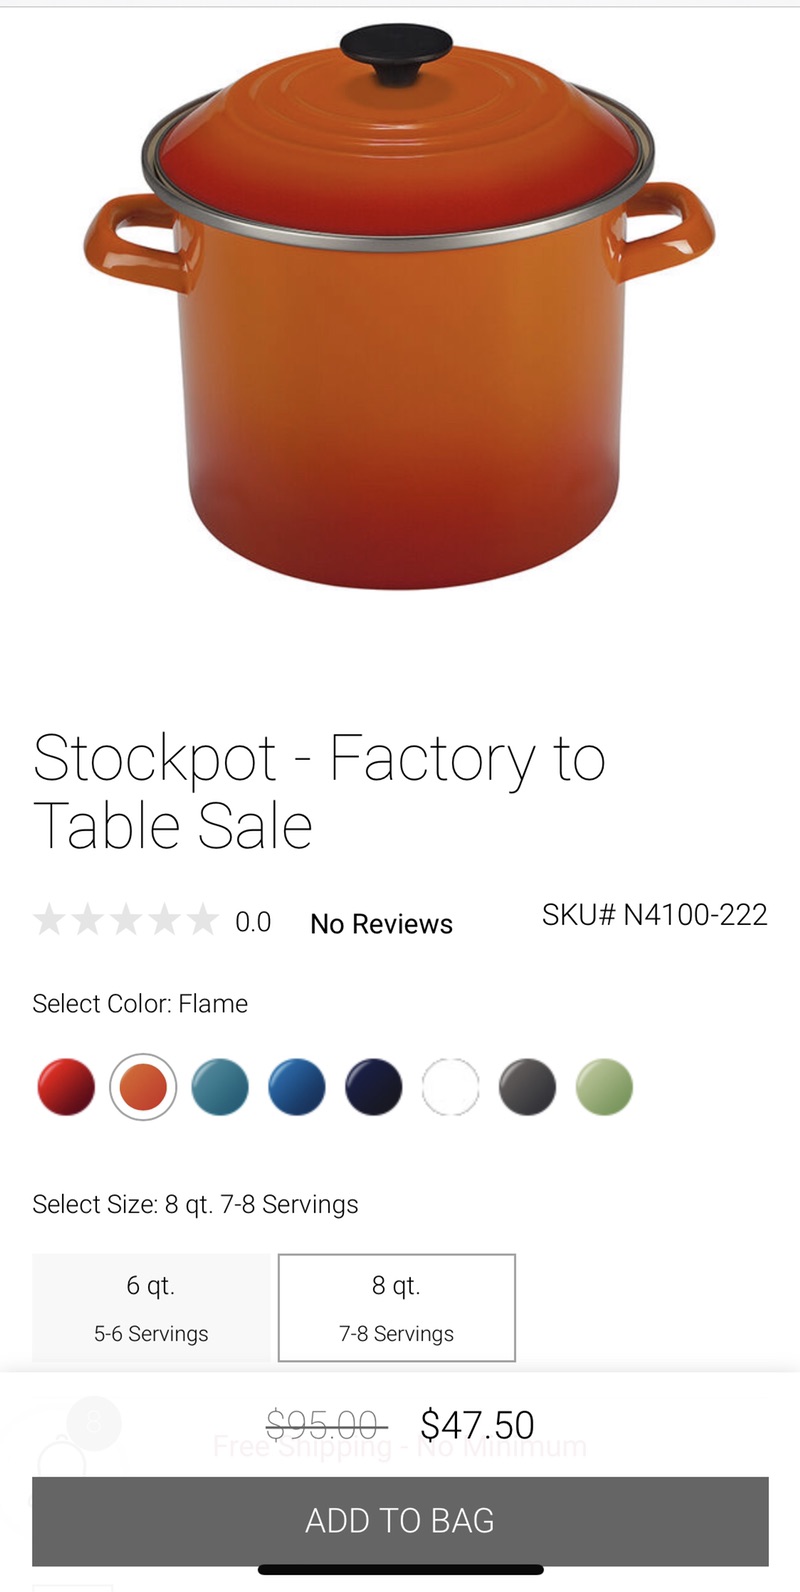 Stockpot - Factory to Table Sale | Le Creuset® Official Site 湯鍋